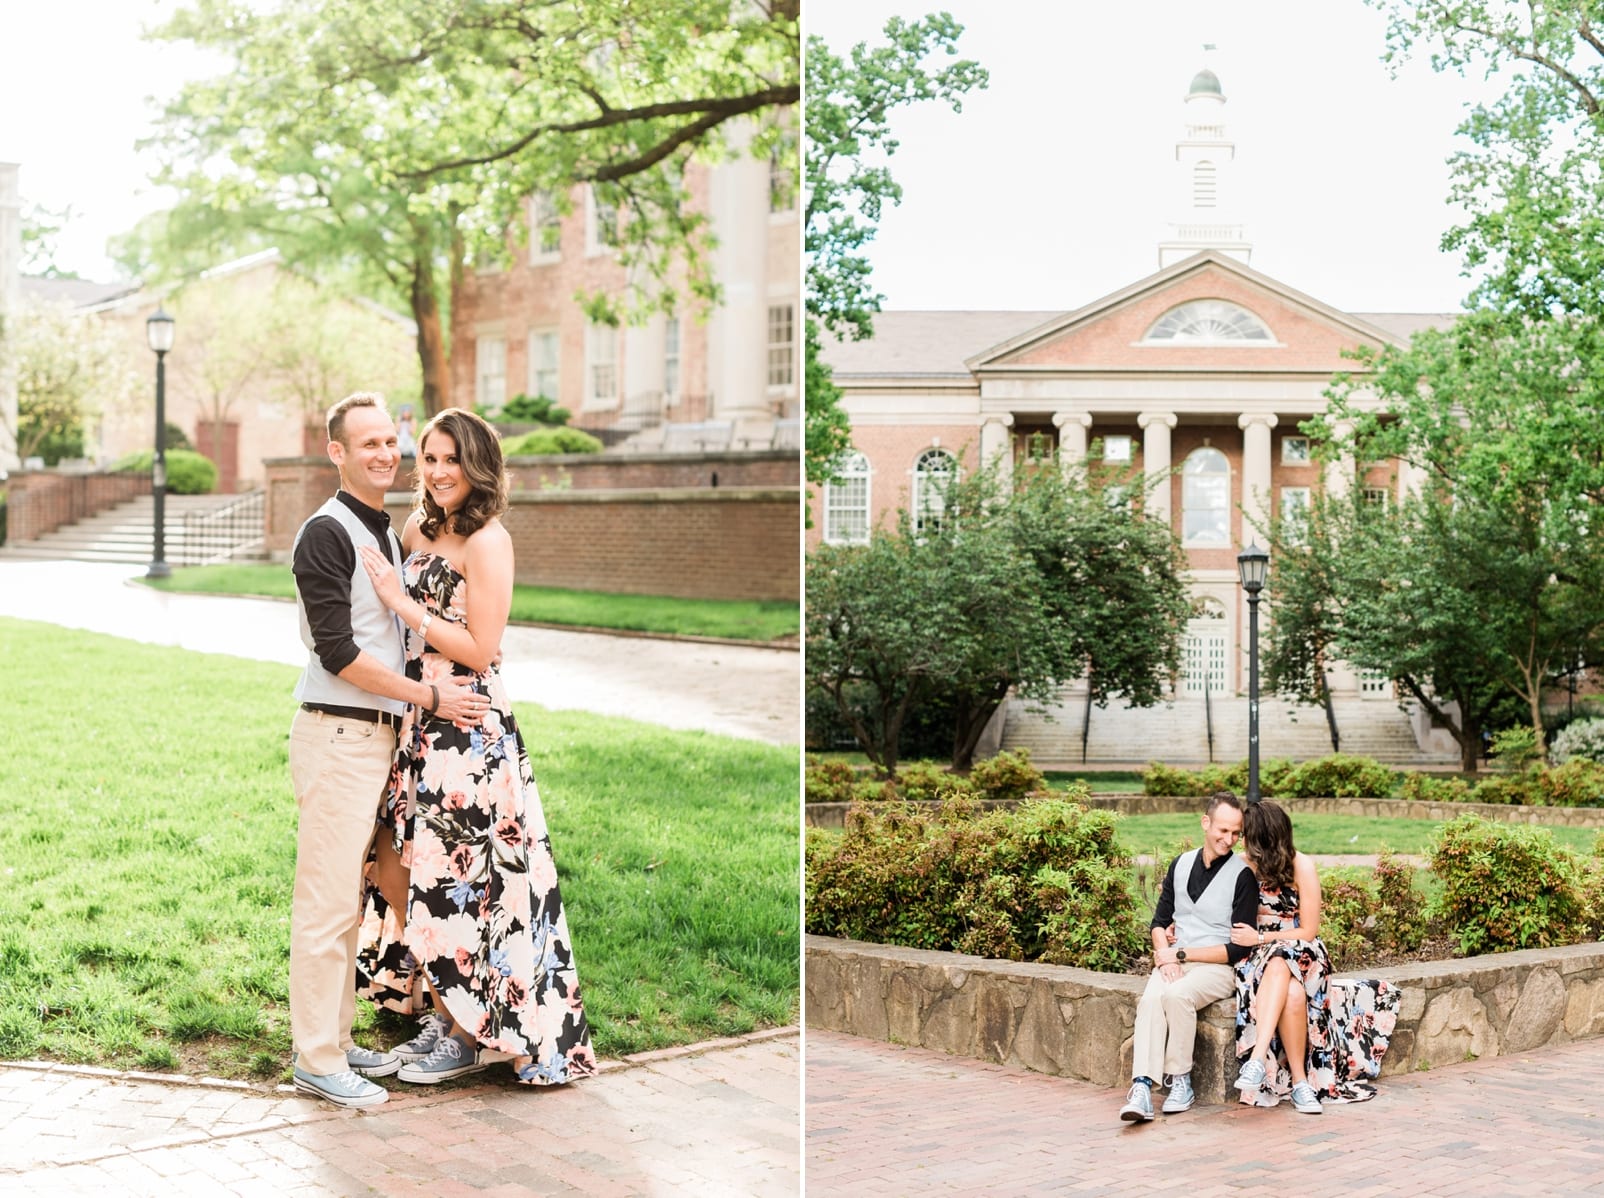 Chapel Hill UNC campus engagement session with couple kissing in front of a campus building photo